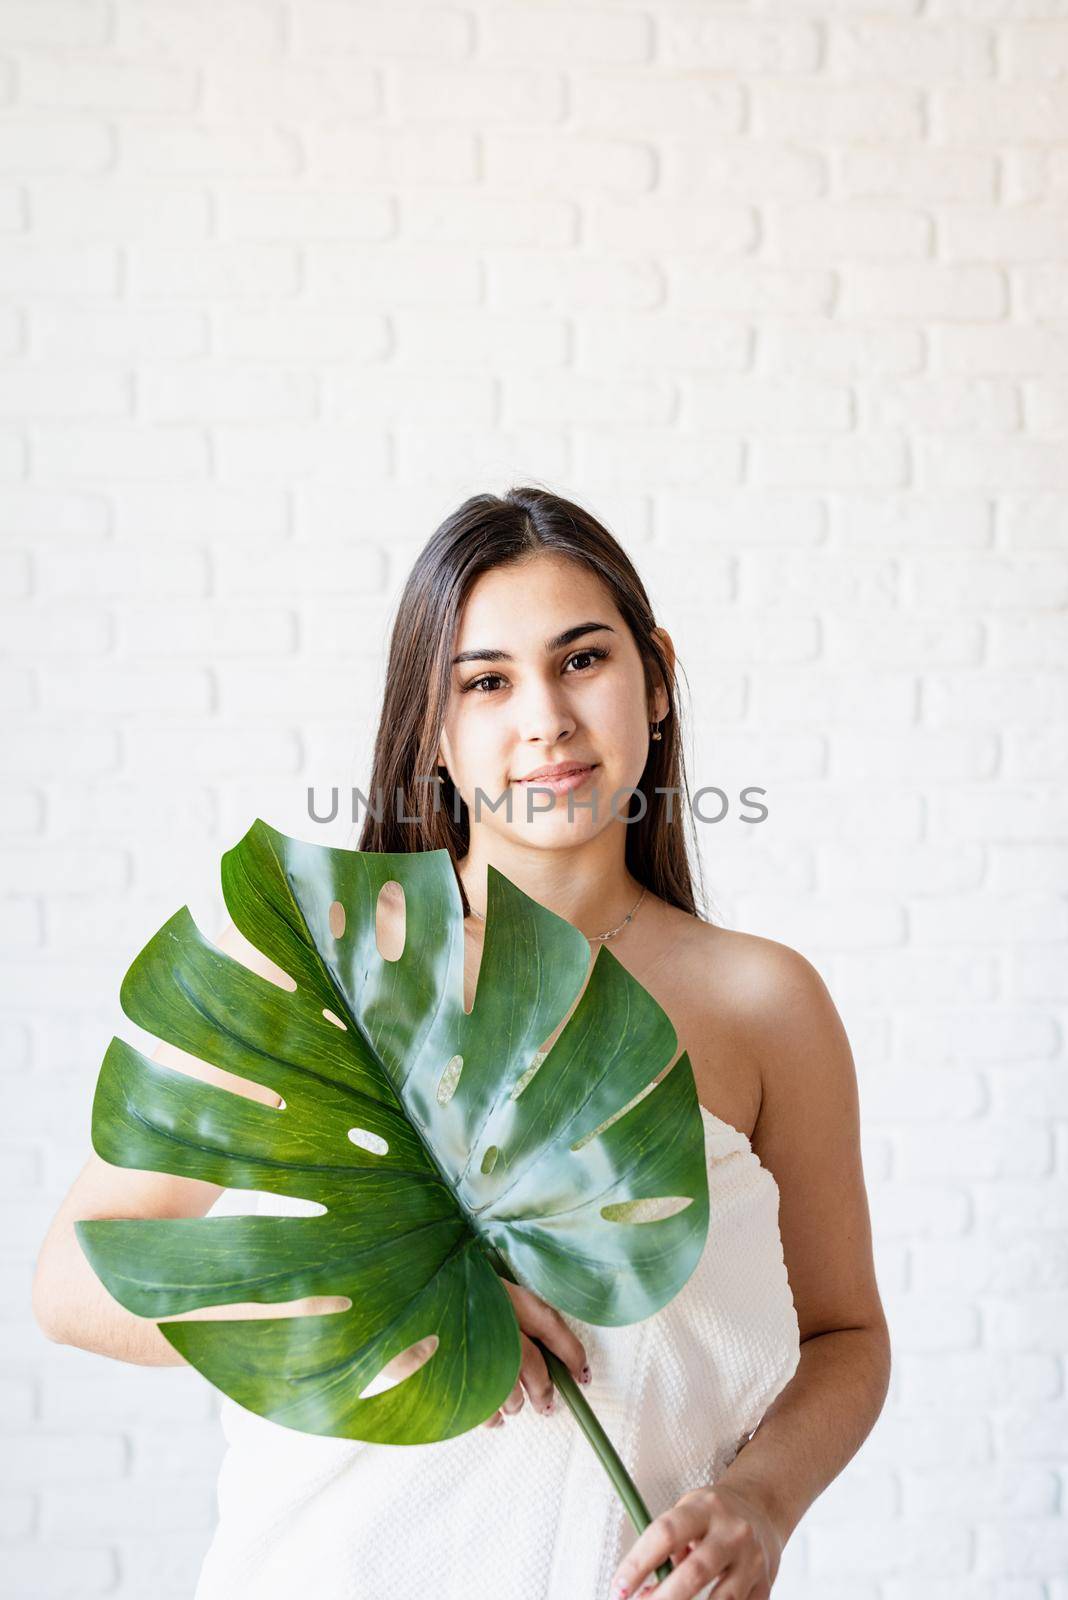 Spa Facial Mask. Spa and beauty. Happy beautiful brunette woman wearing bath towels holding a green monstera leaf in front of her face